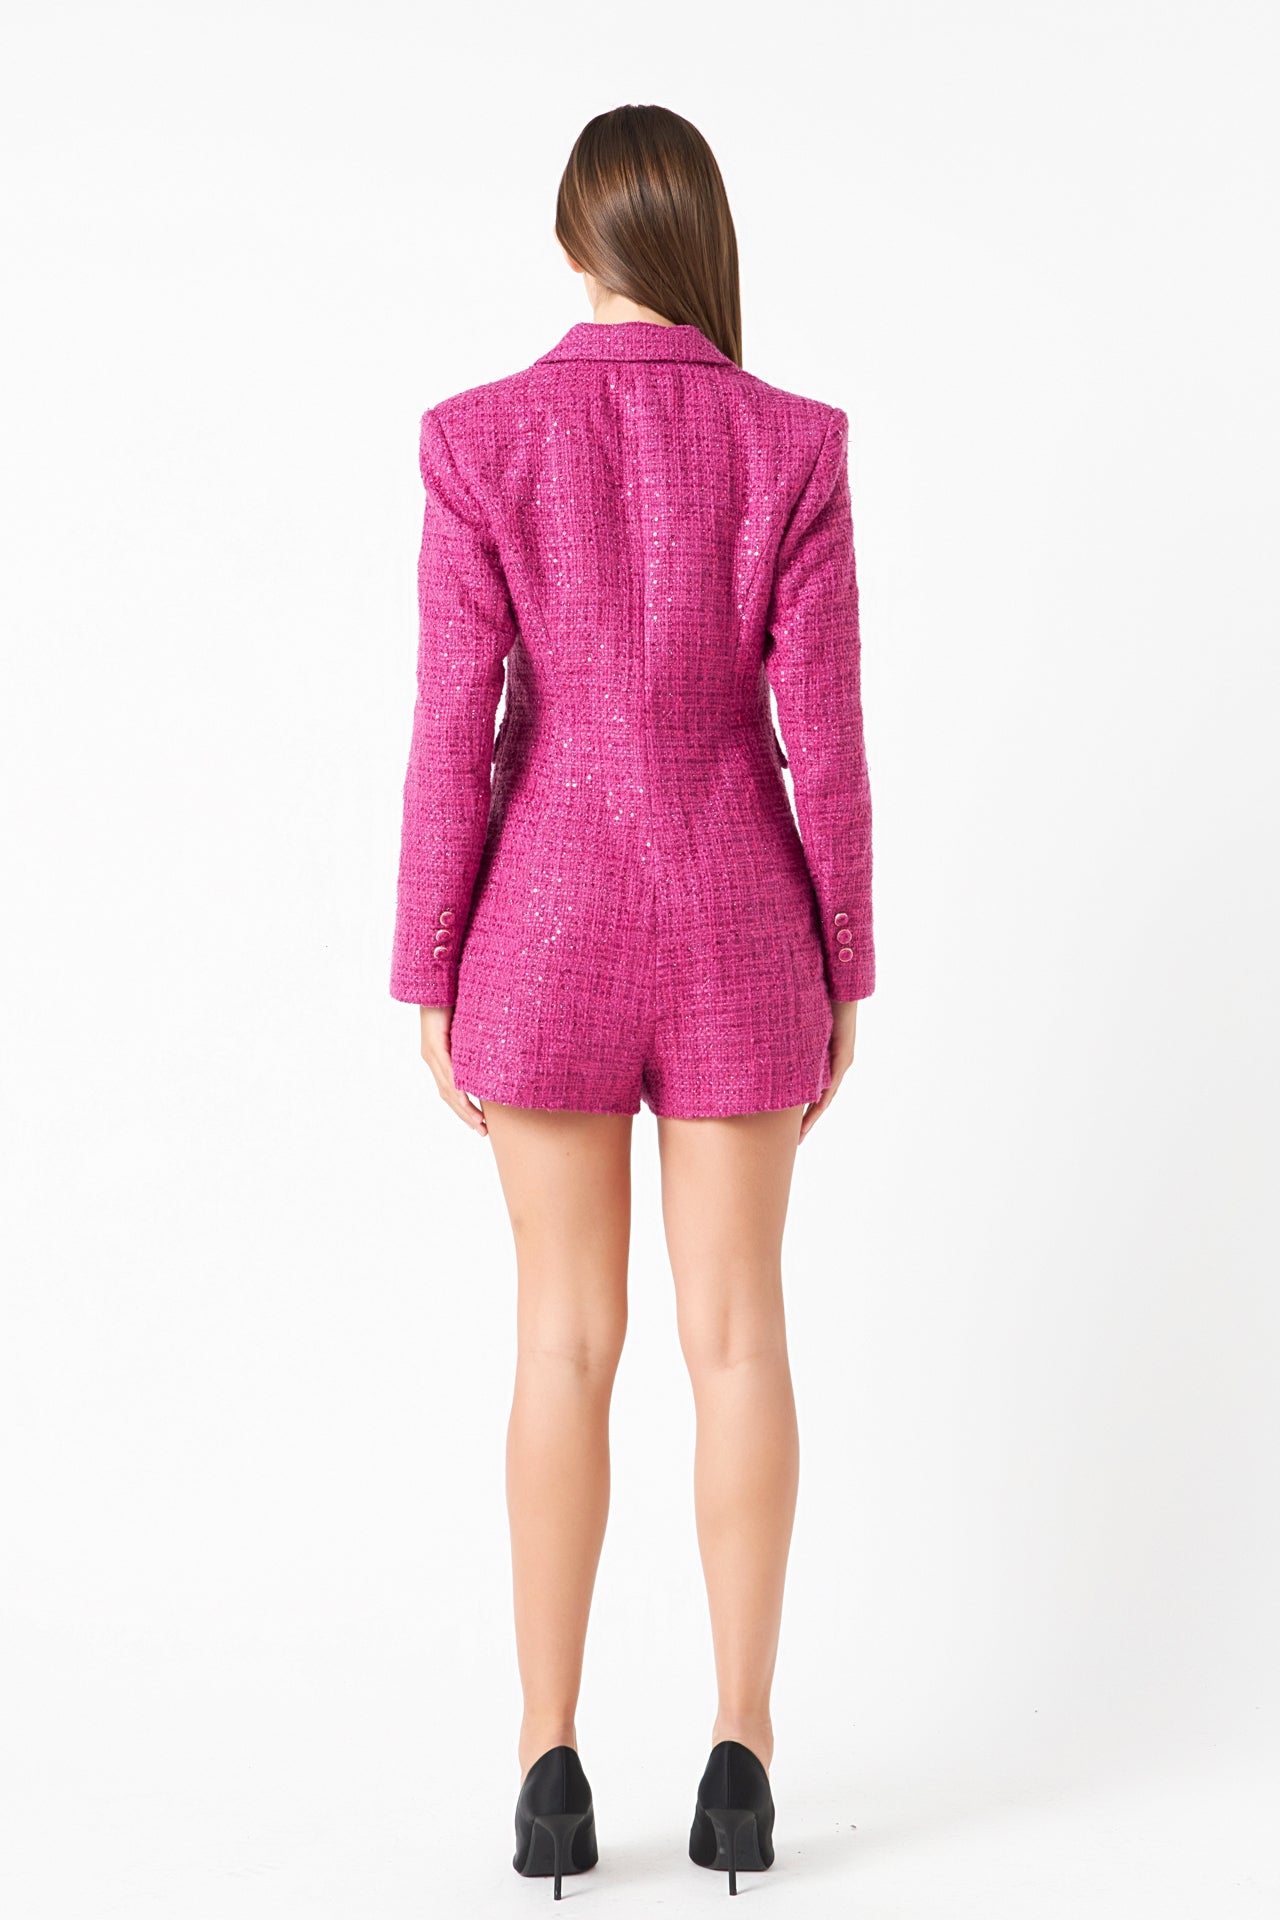 ENDLESS ROSE - Premium Sequin Tweed Blazer Romper - ROMPERS available at Objectrare